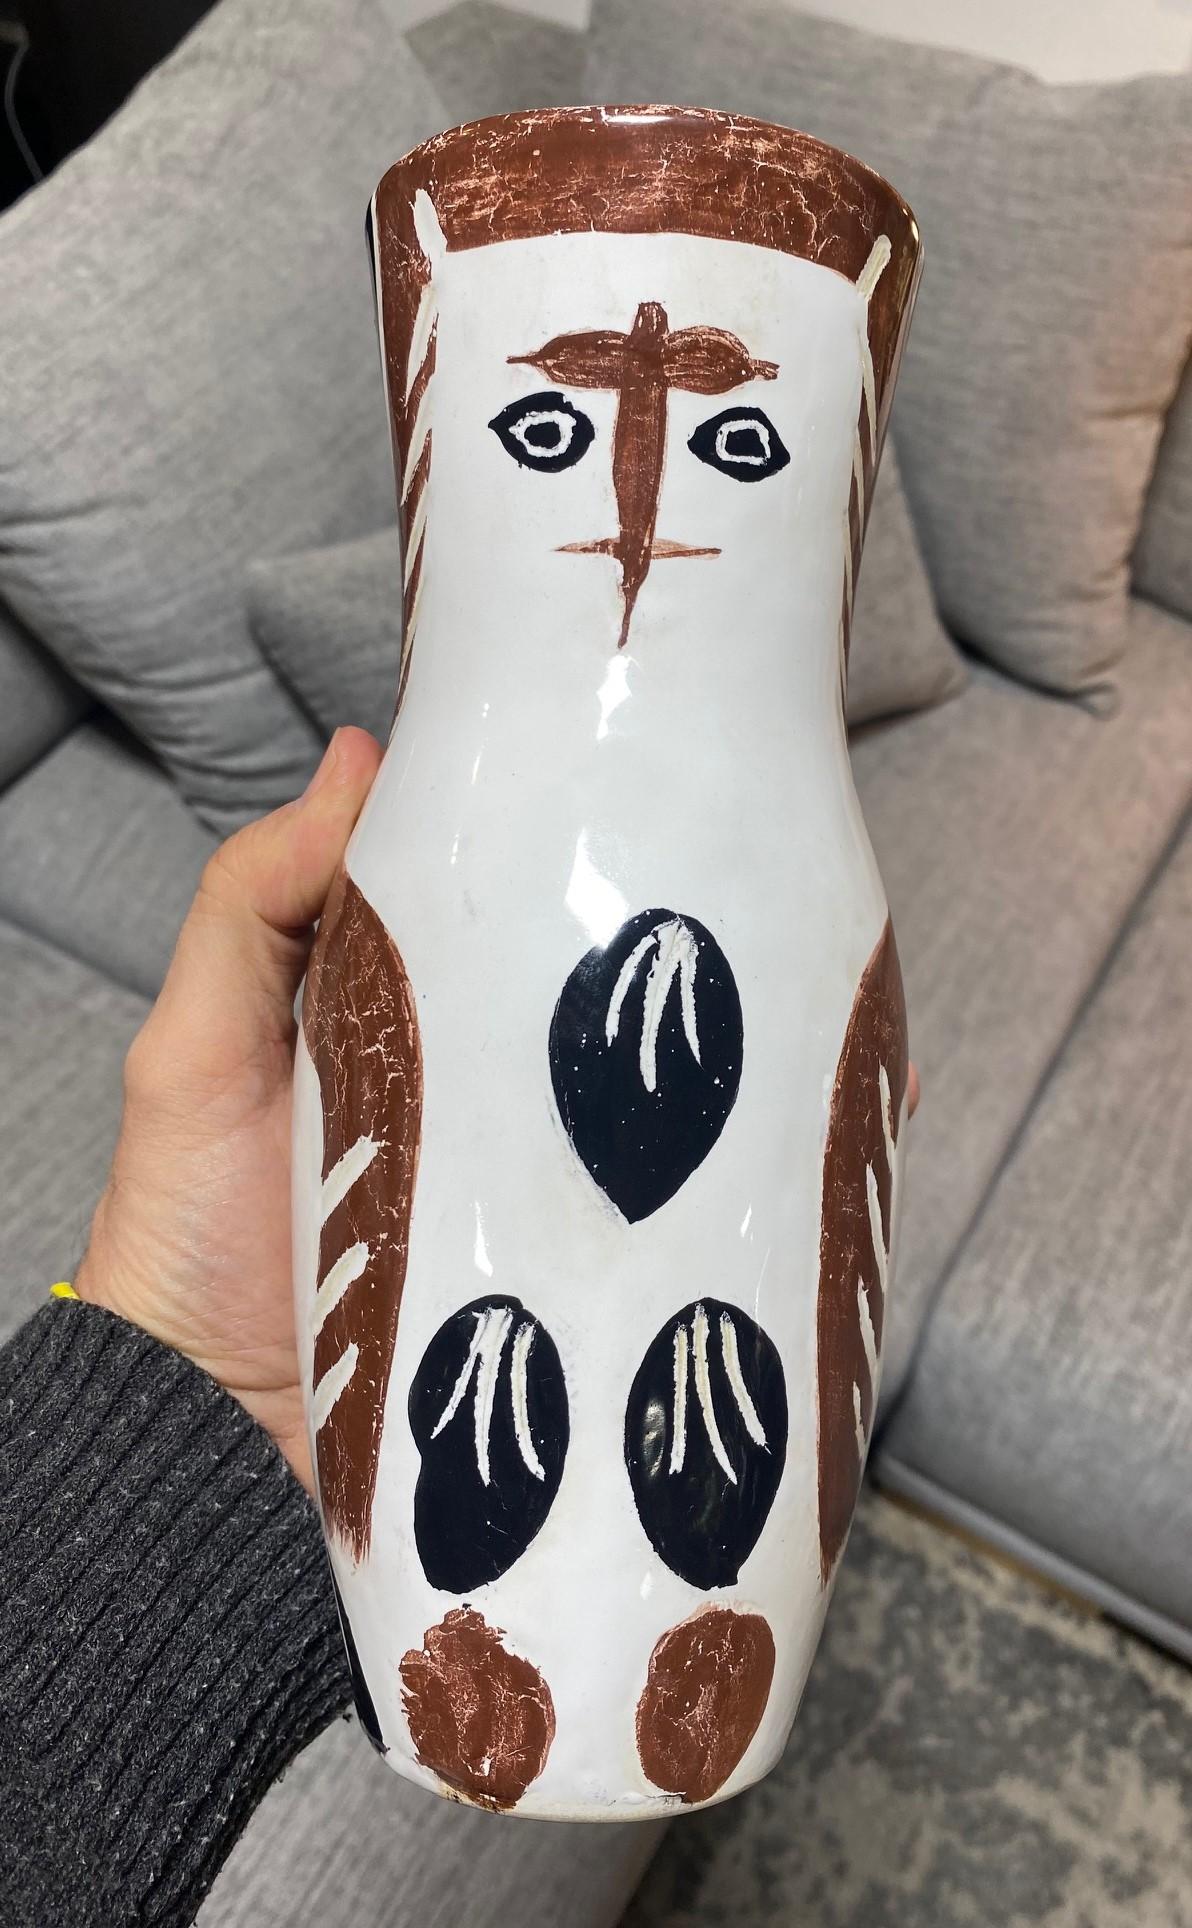 Pablo Picasso Signed Limited Madoura Pottery Chouetton Owl Vase A.R. 135, 1952 For Sale 4